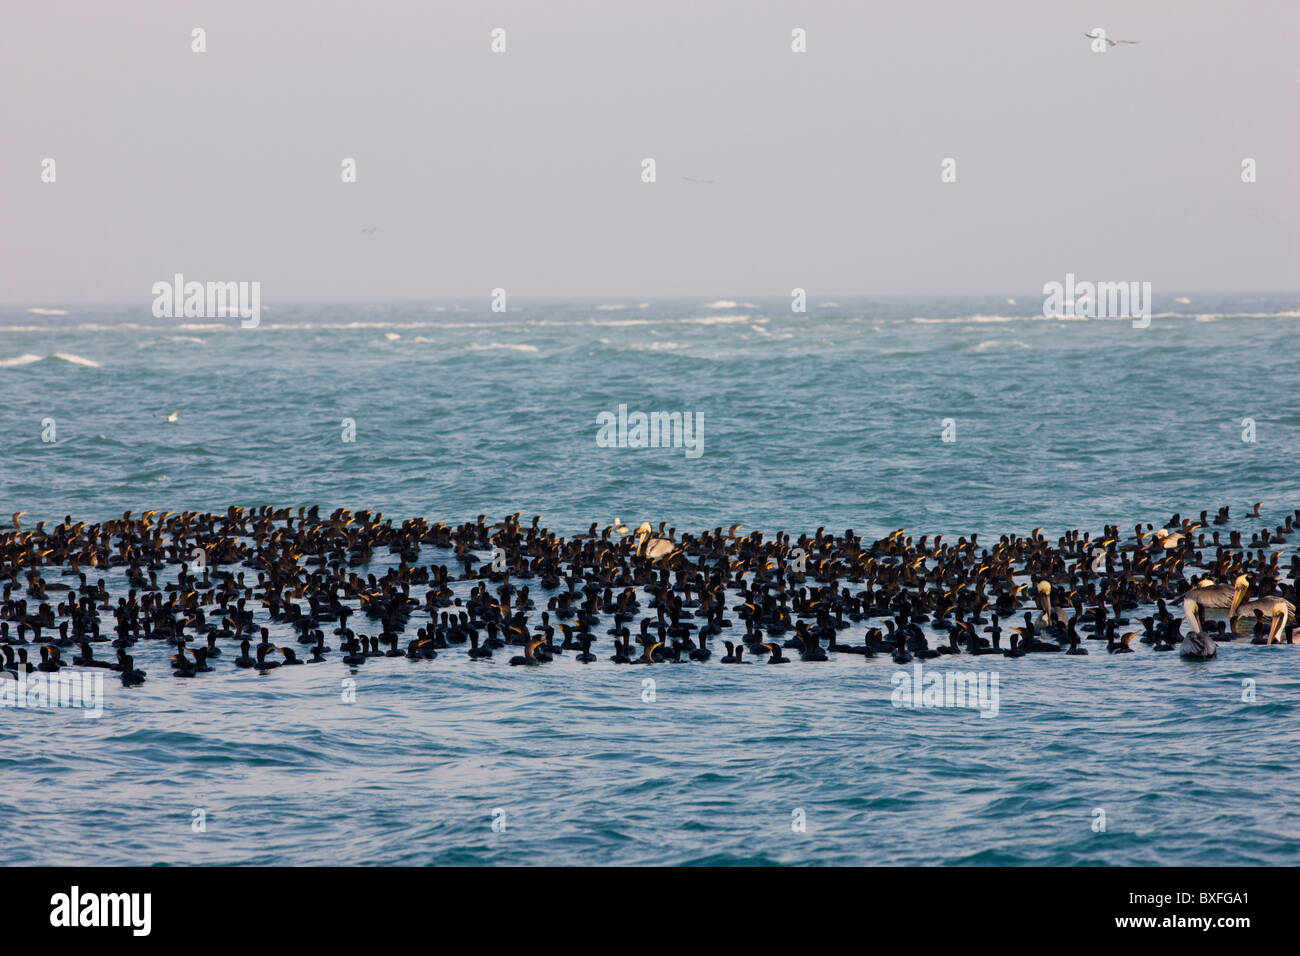 Double-crested Cormorants and Brown Pelicans floating in the Gulf of Mexico by Anna Maria Island, Florida, USA Stock Photo